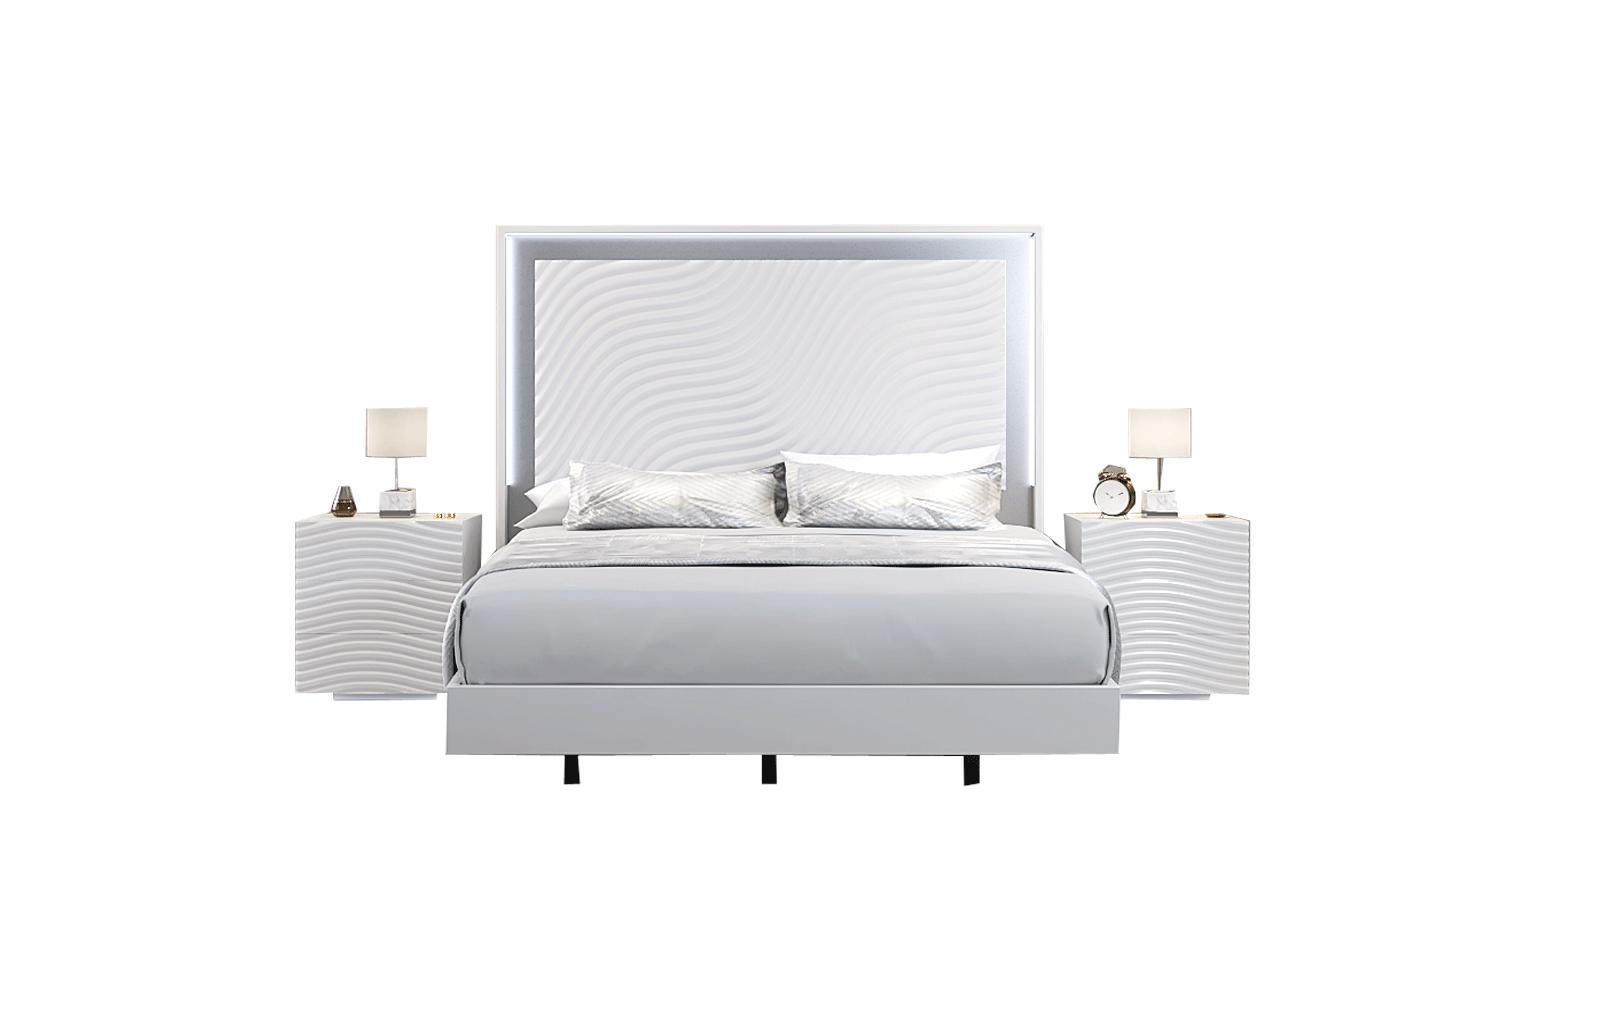 

    
Glam Shiny White King Bedroom Set 3 WAVE ESF Contemporary Modern MADE IN SPAIN
